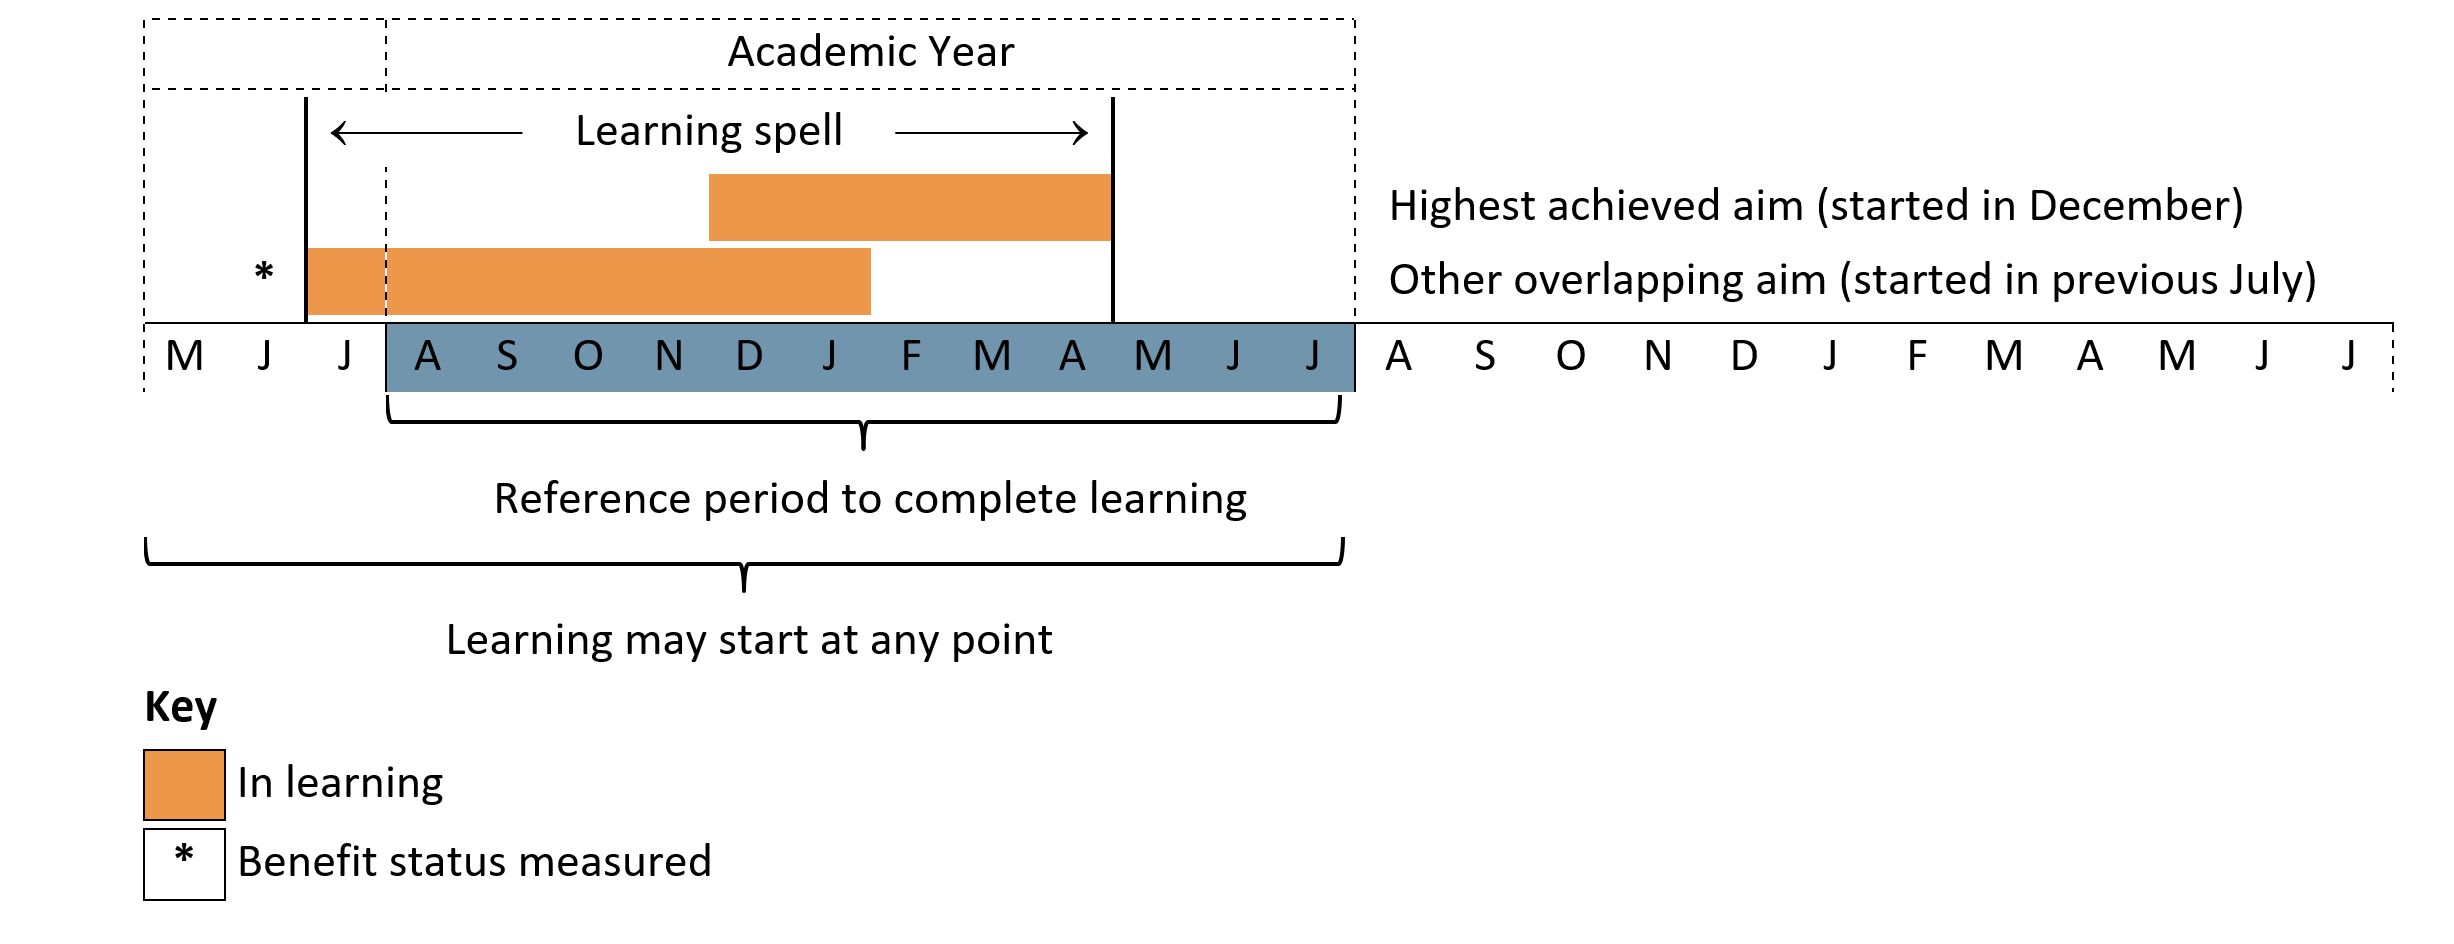 Time line showing the reference period for overlapping aims